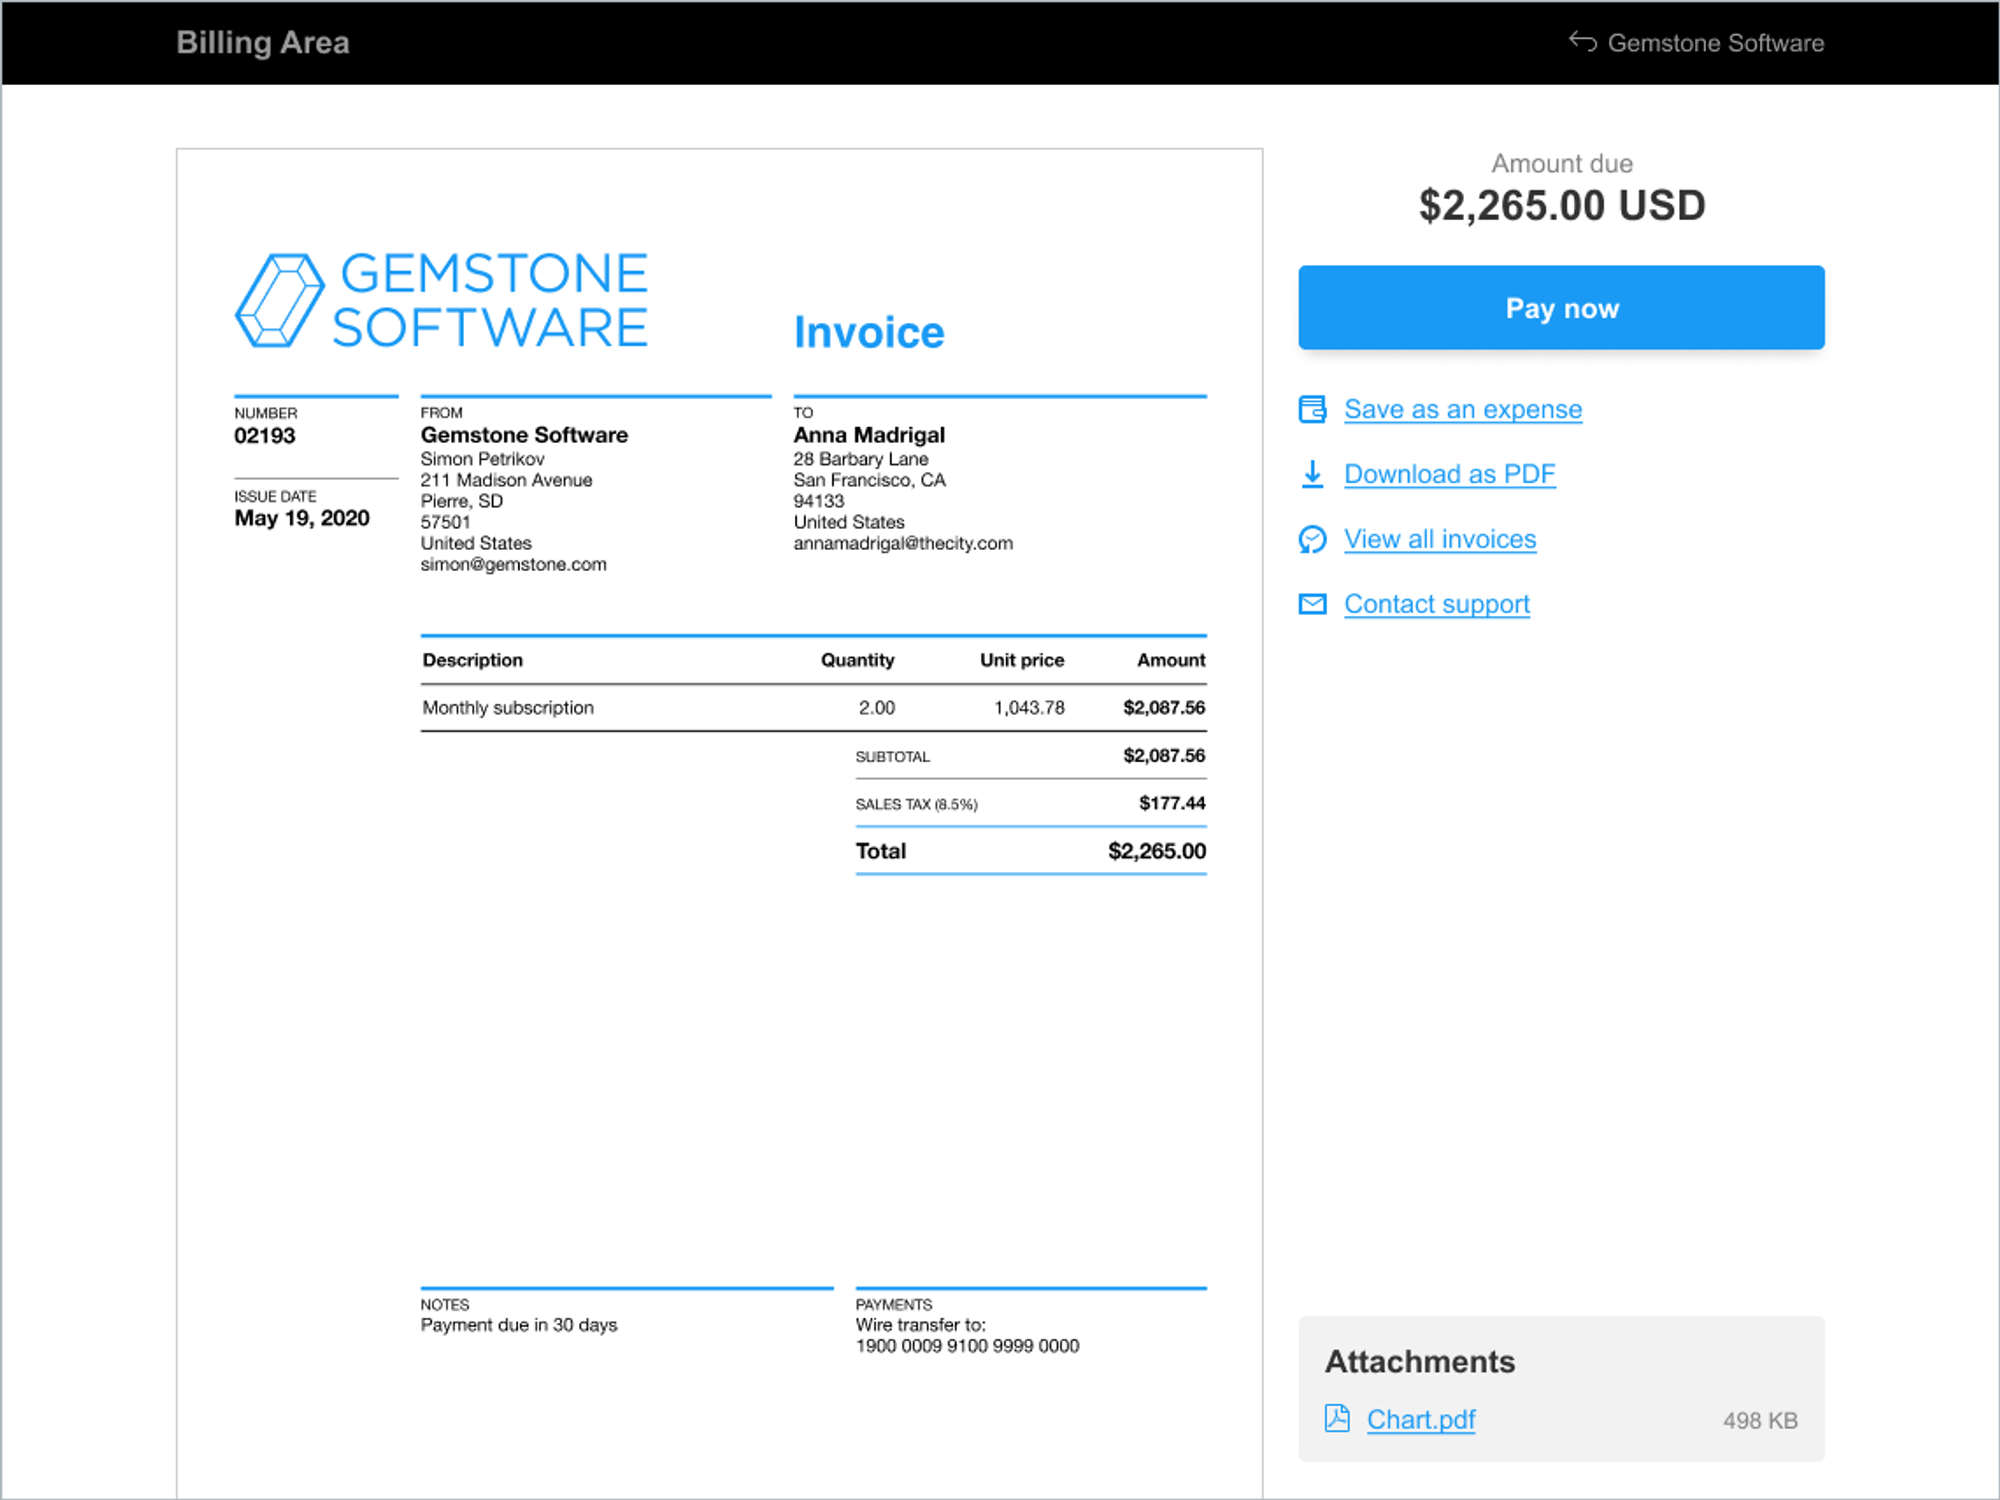 Your customer will see a "pay now" button directly on the invoice.